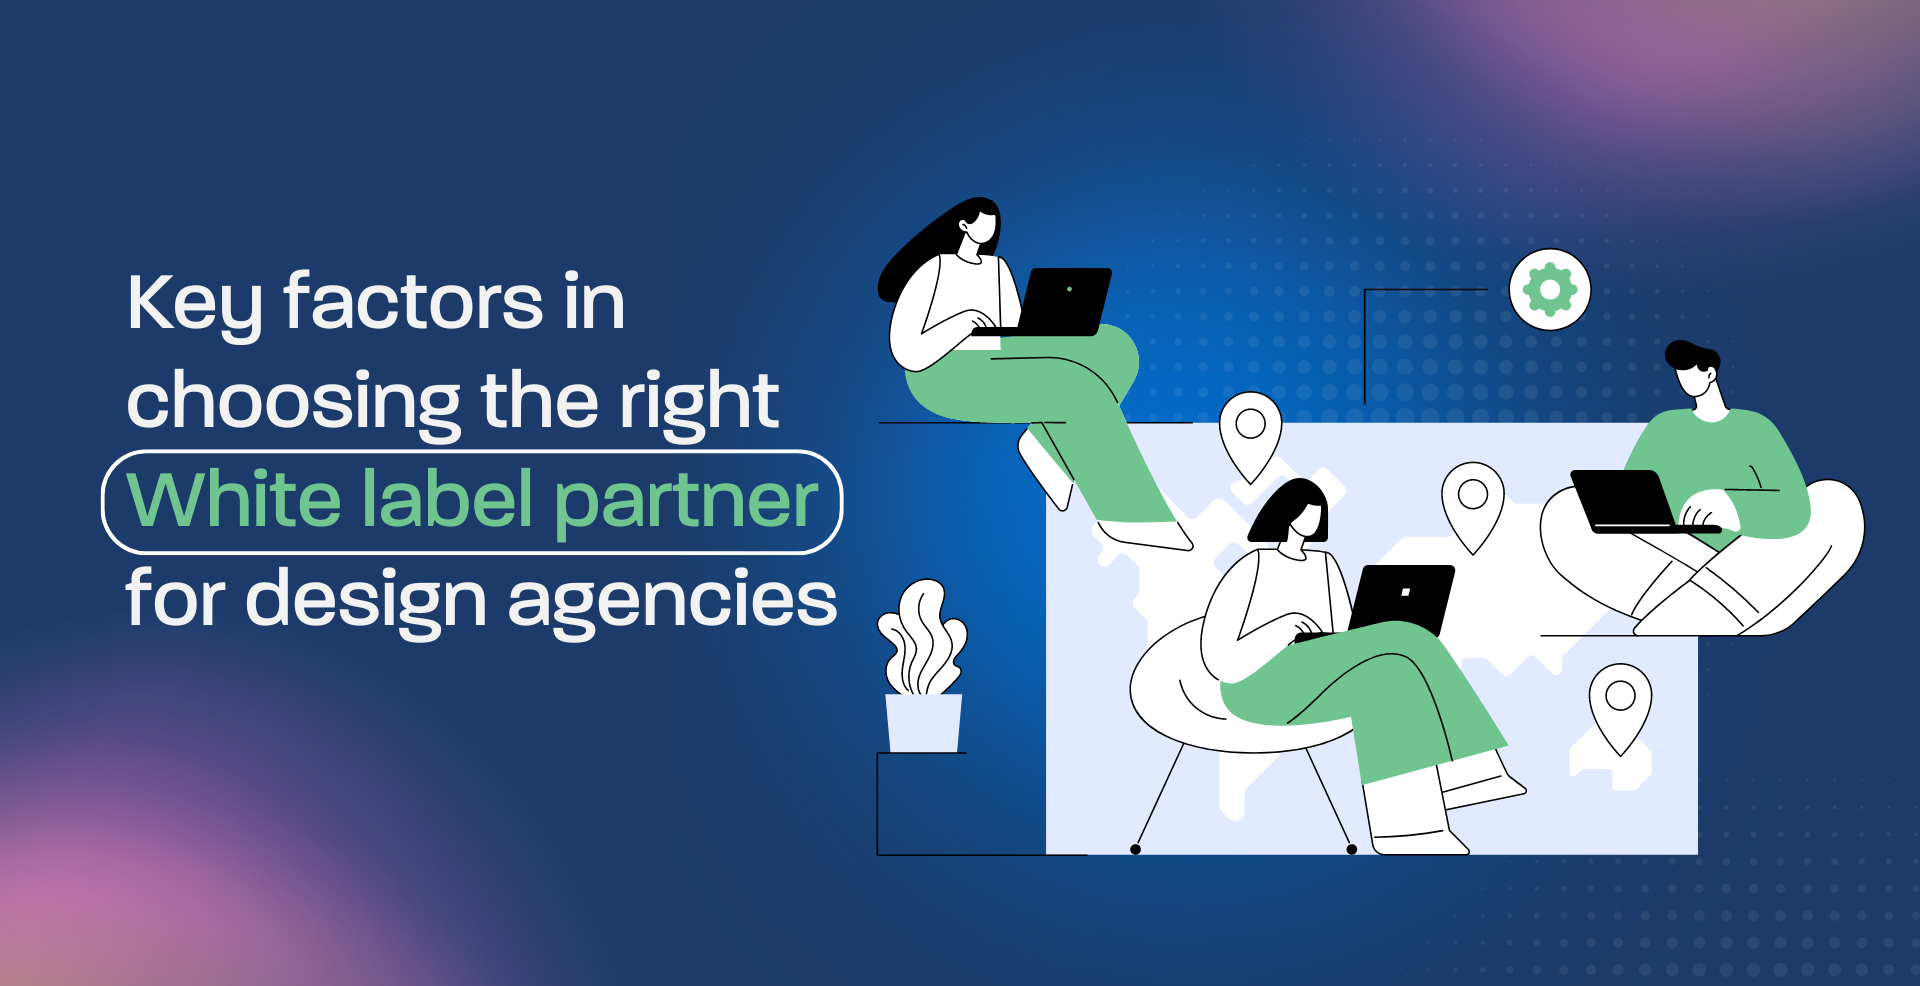 Key factors in choosing the right white label partner for design agencies